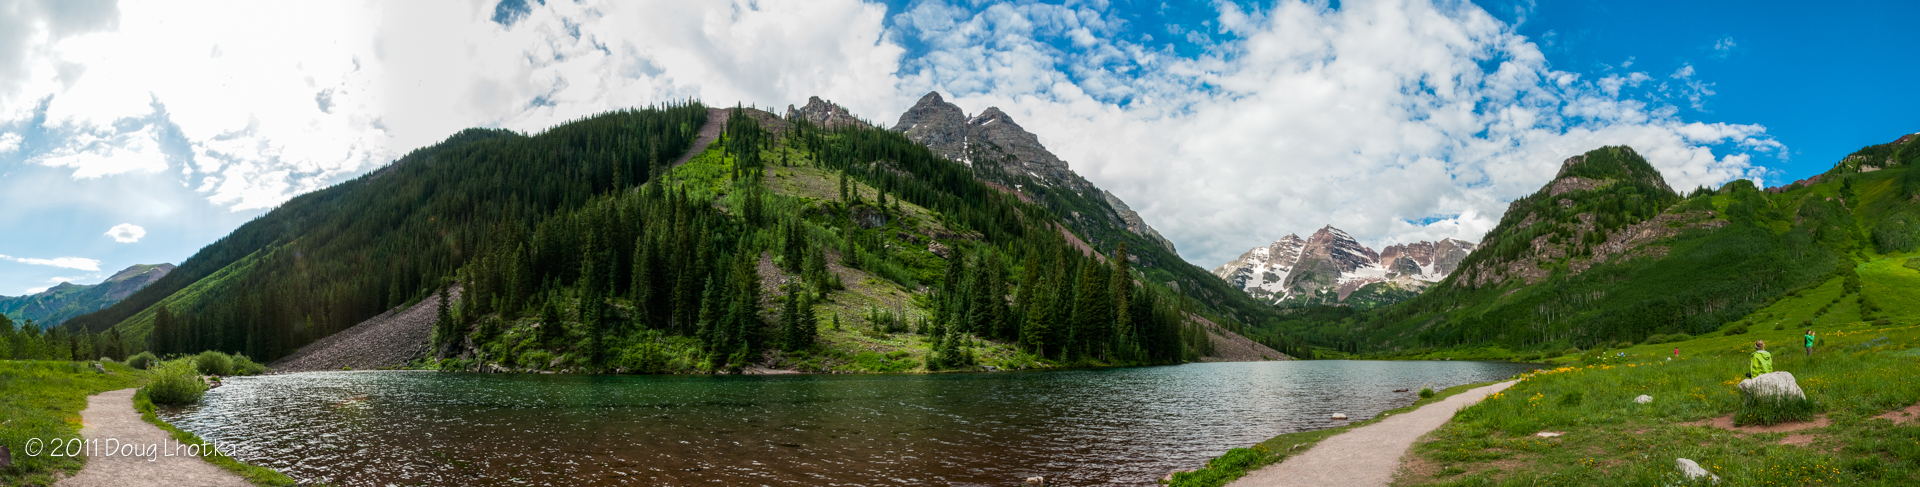 Friday Photo - Maroon Bells, being loved to death